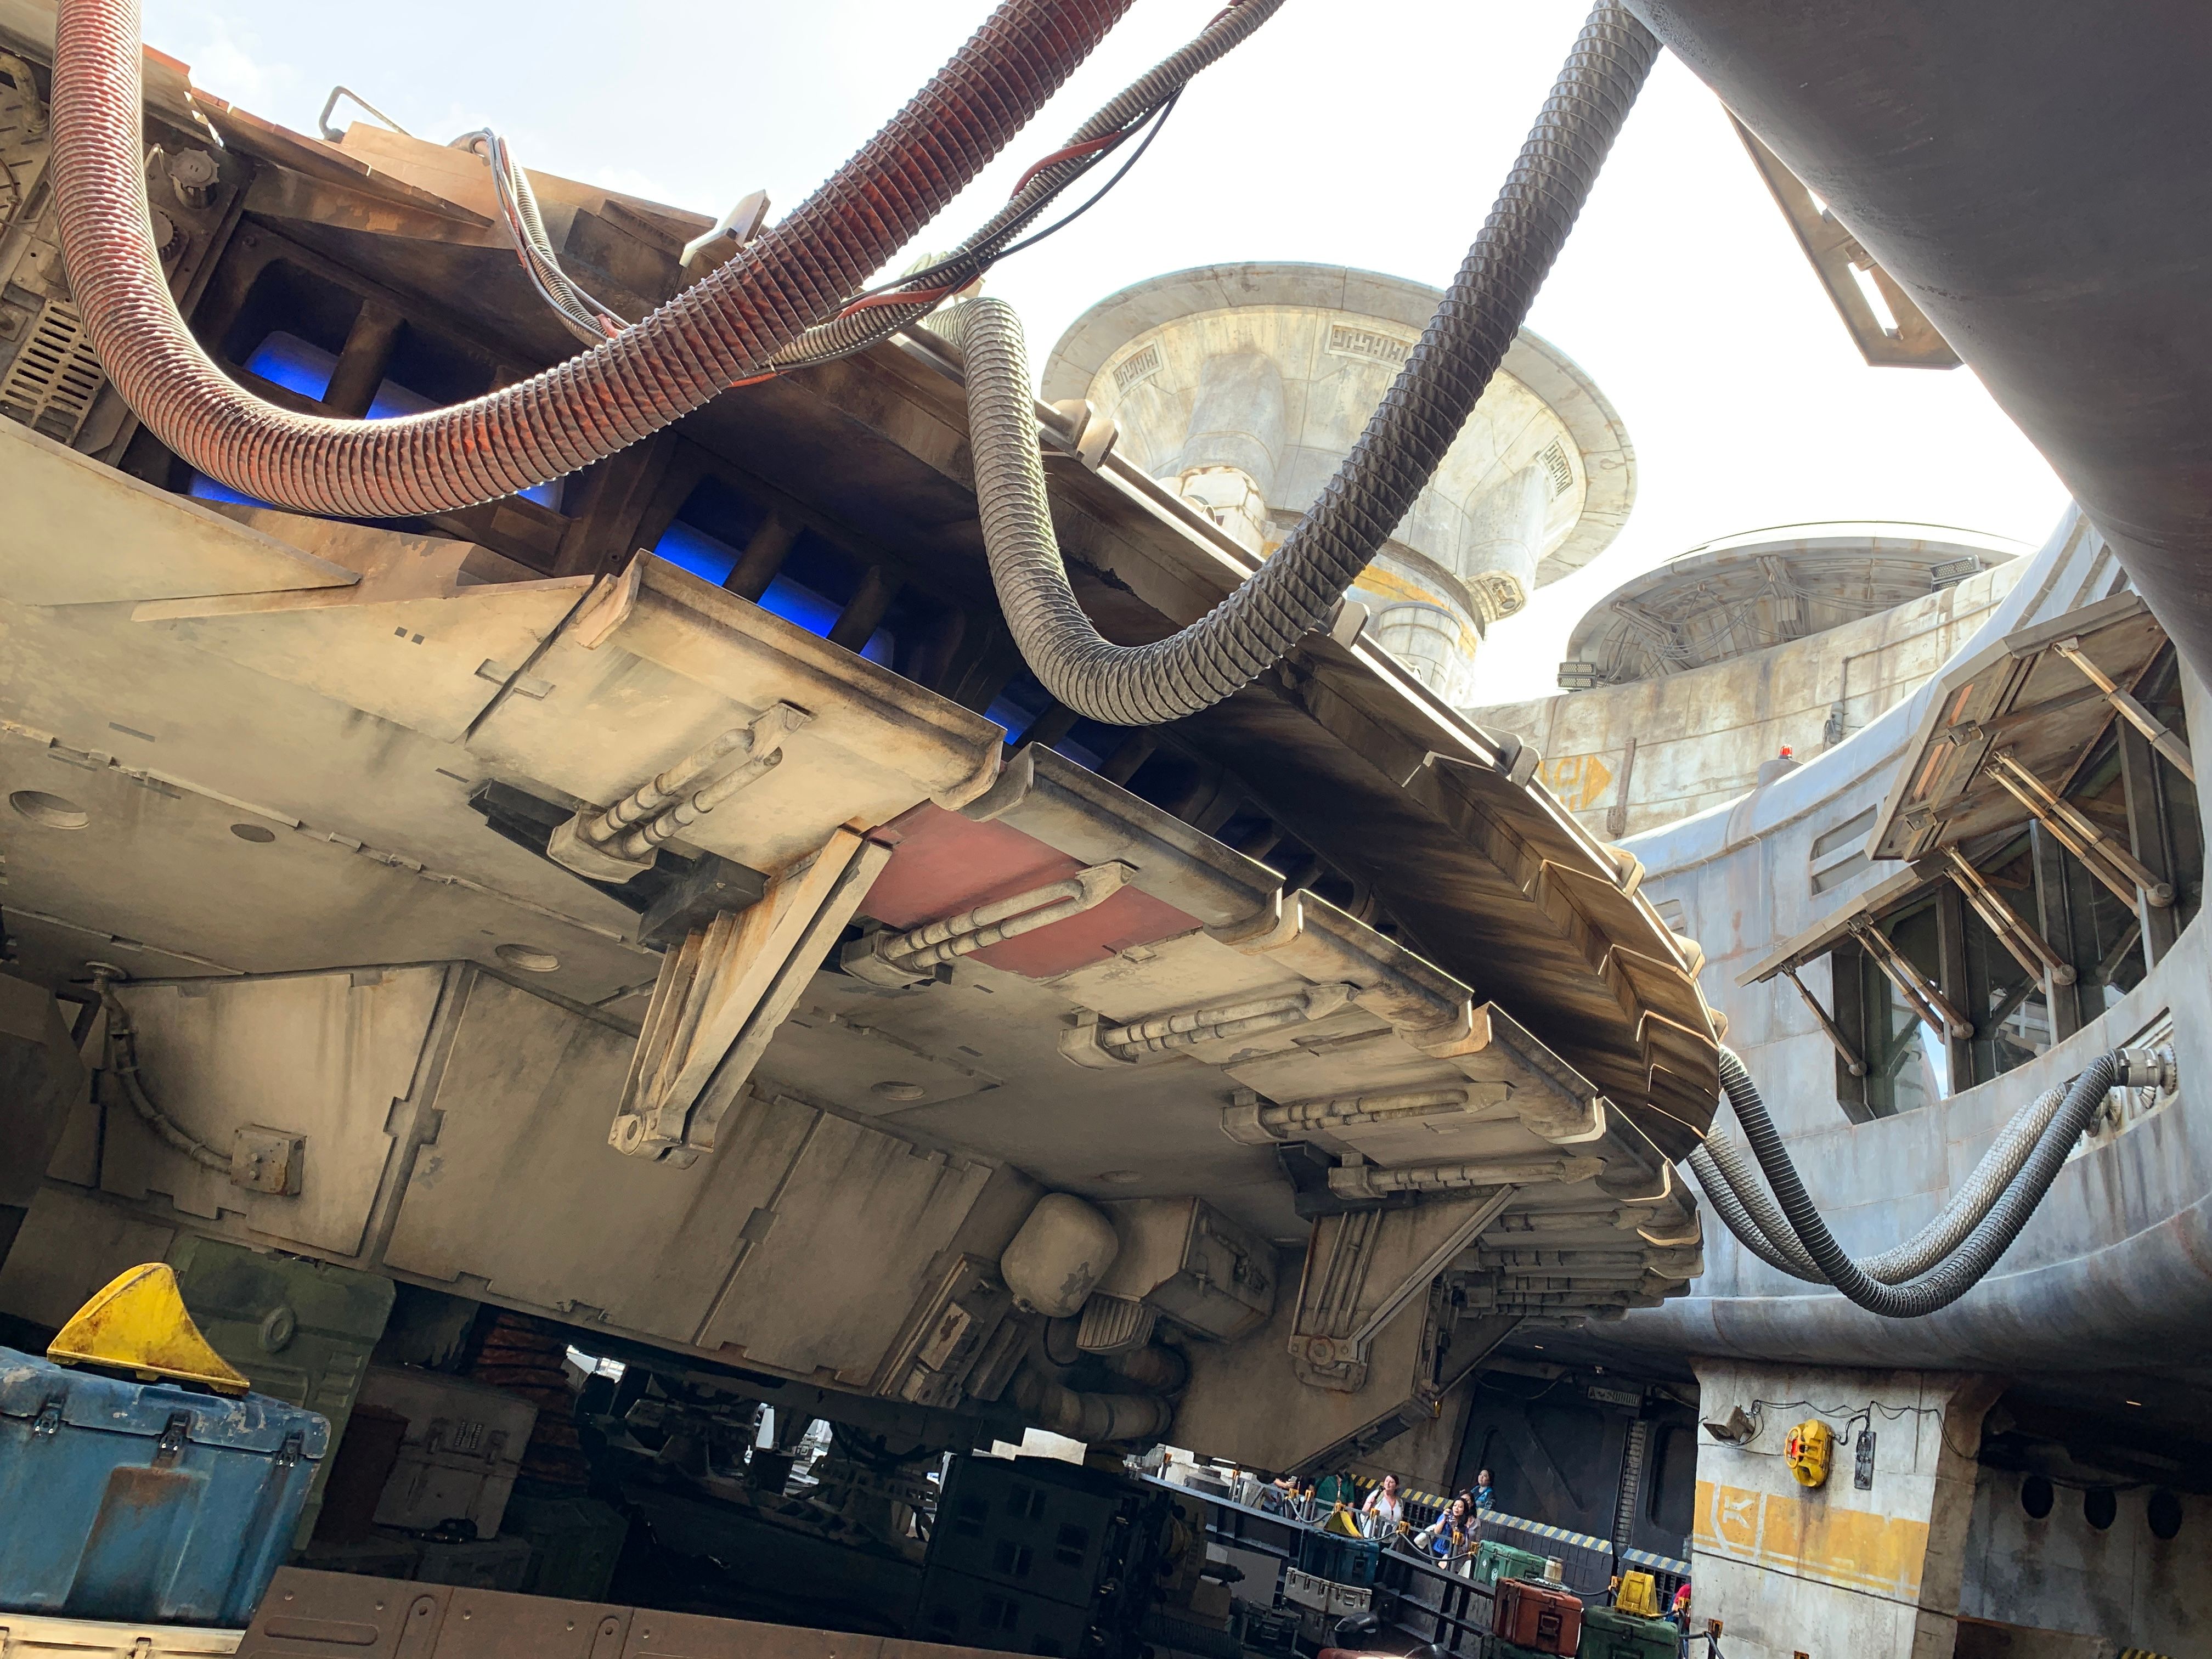 How The Millennium Falcon Ride Actually Works at Galaxy’s Edge